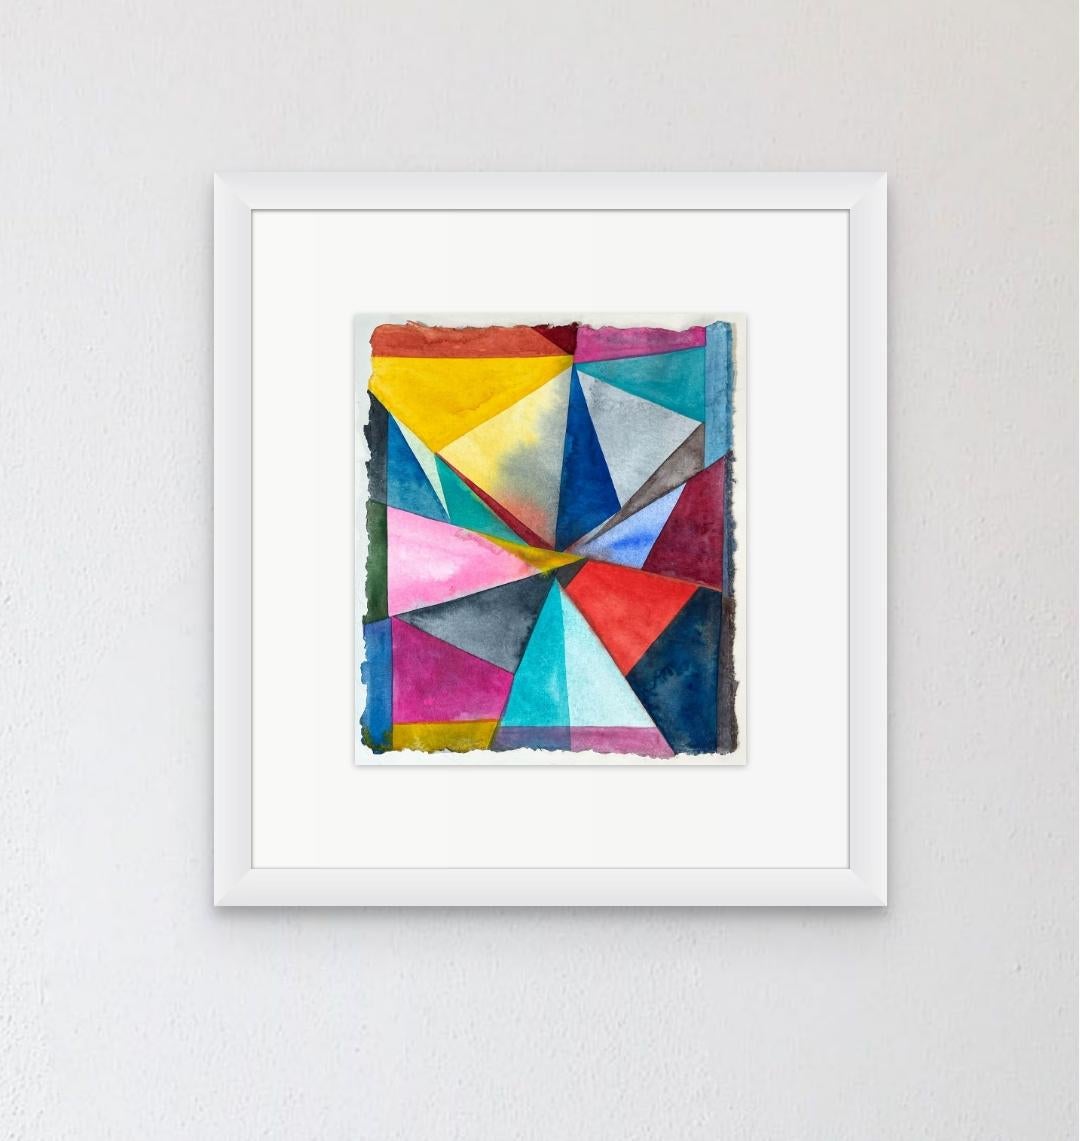 Cruisin' Every Path, abstract, colorful, watercolor on paper - Abstract Art by Sarah Brenneman